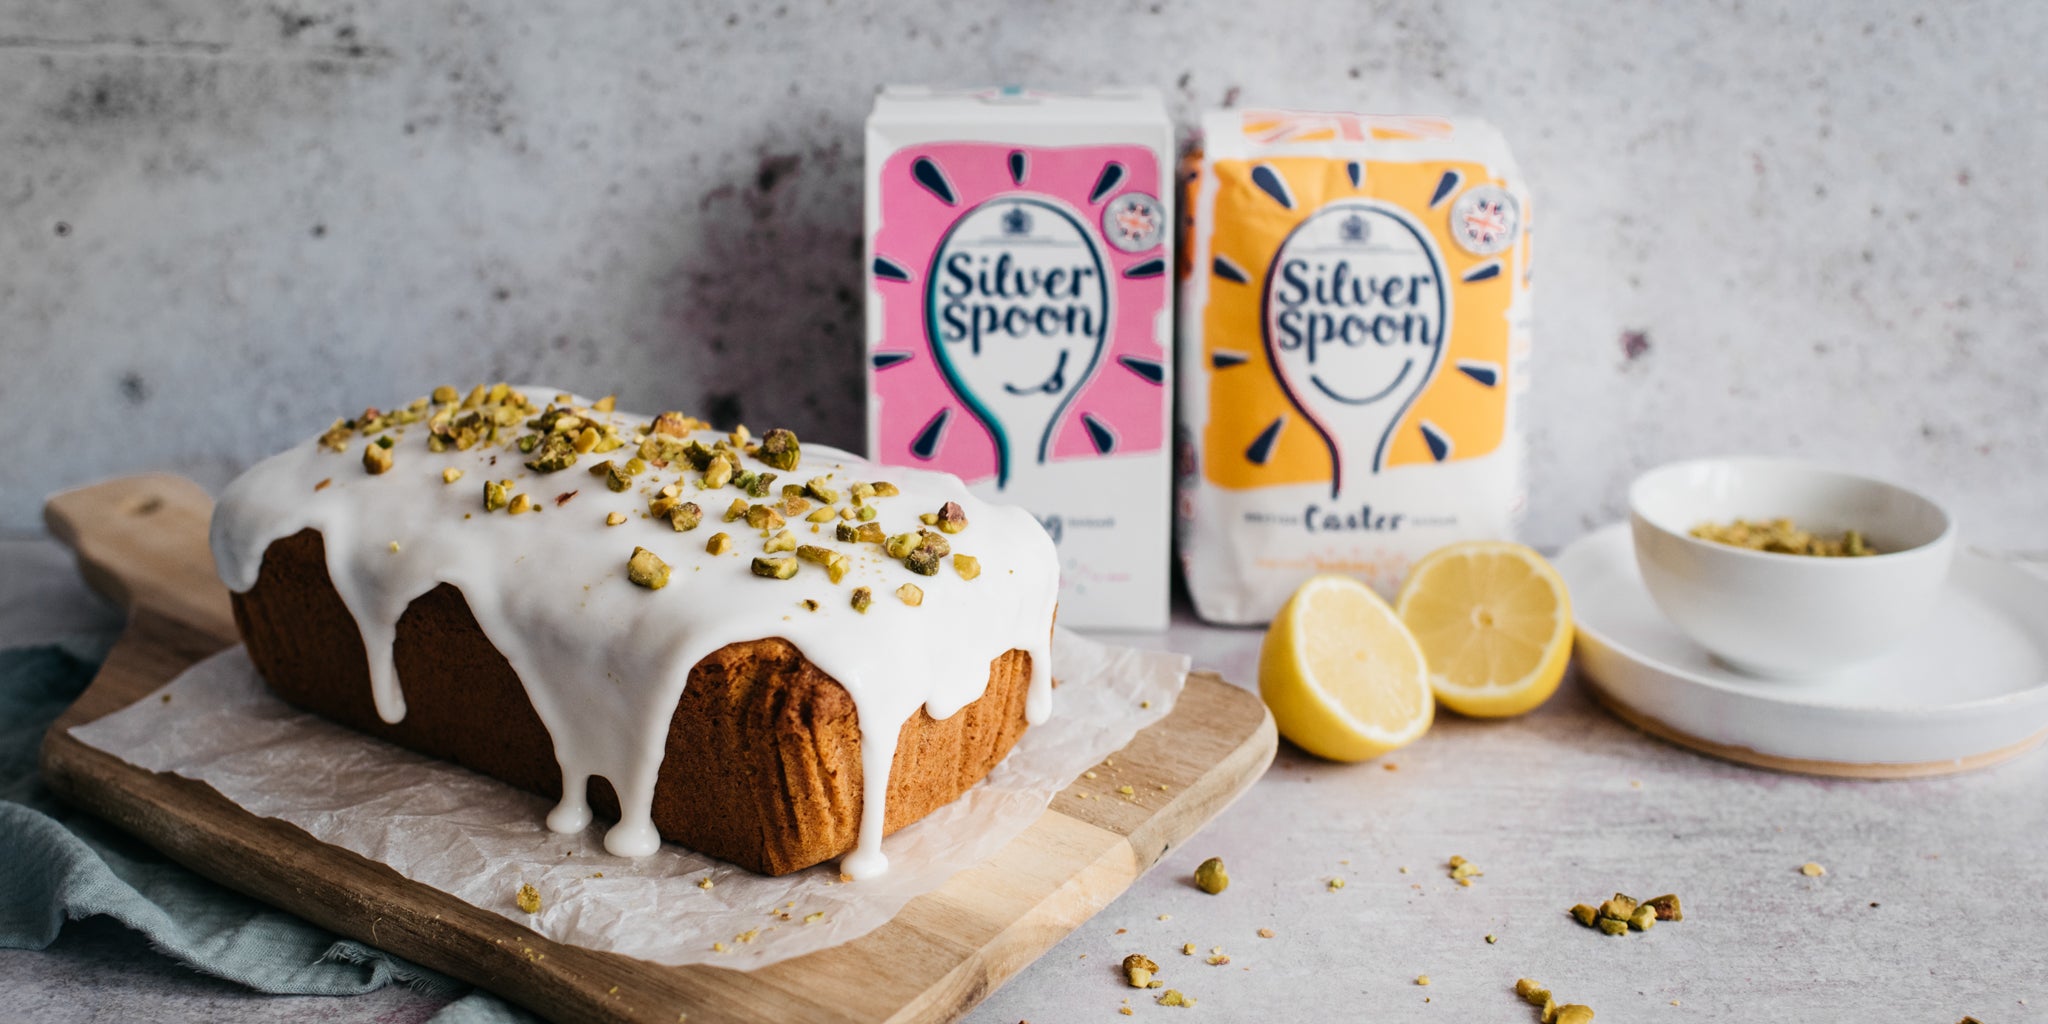 Gluten Free Vegan Lemon Drizzle Cake topped with nuts, next to a sliced lemon and a box of Silver Spoon Caster and Icing Sugar